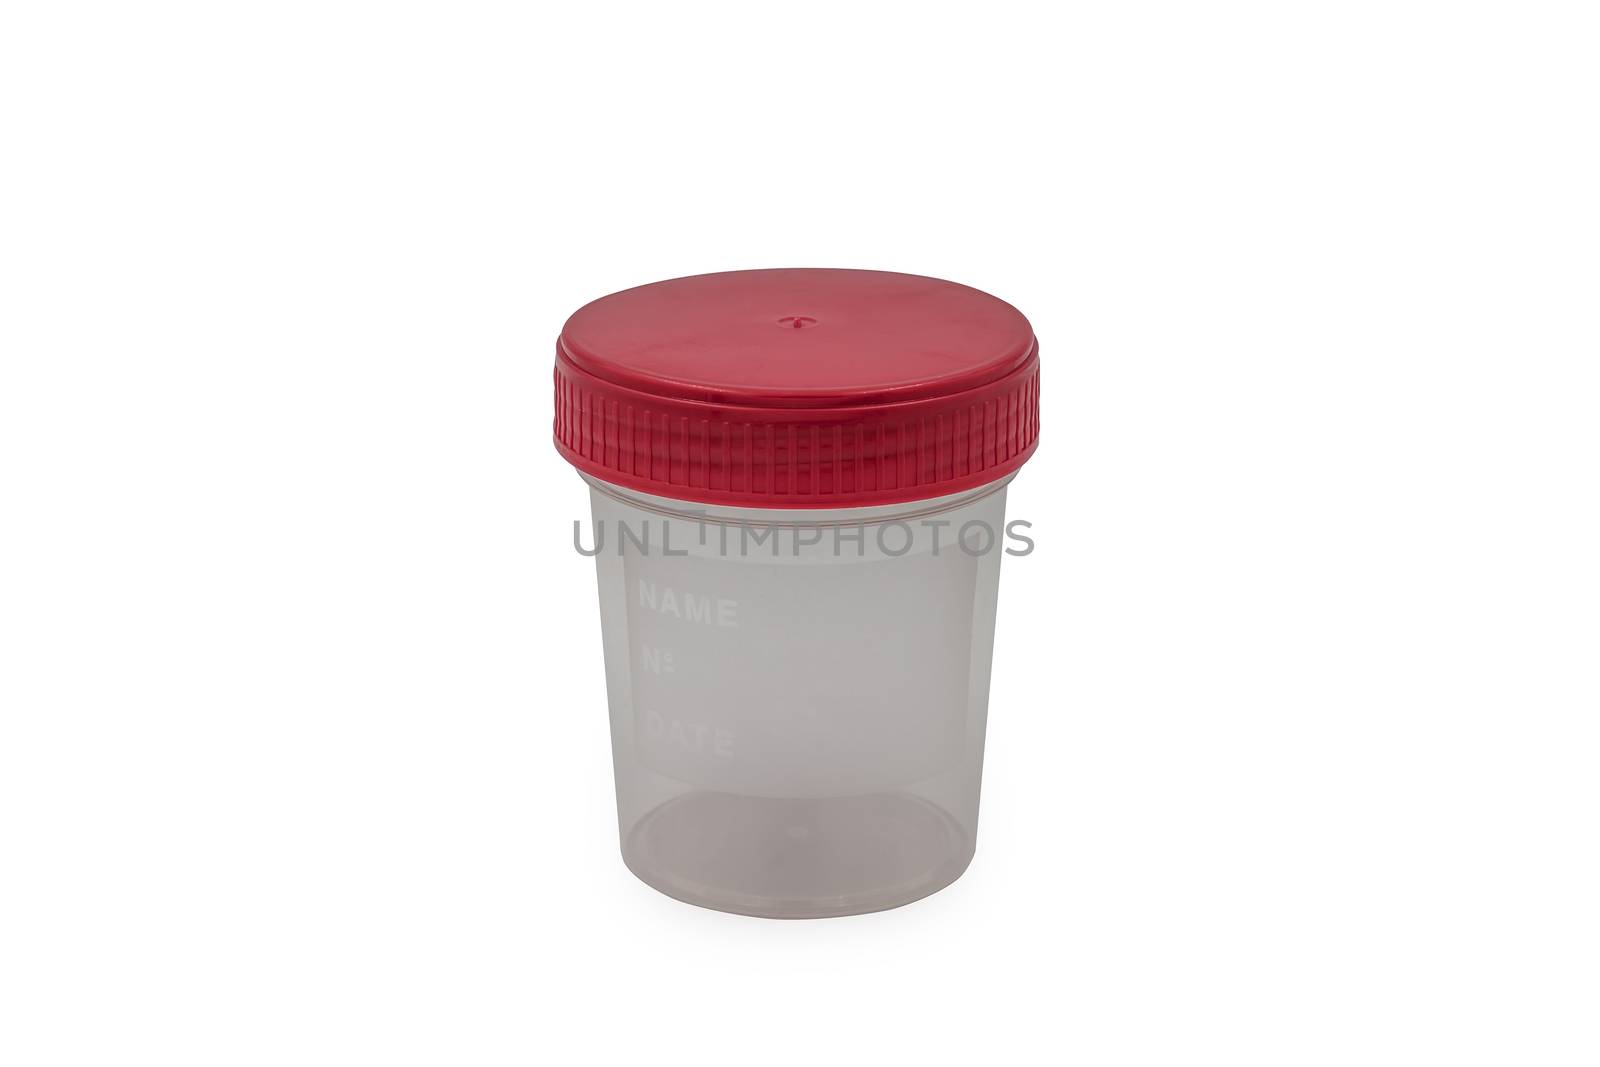 urine container isolated on white background